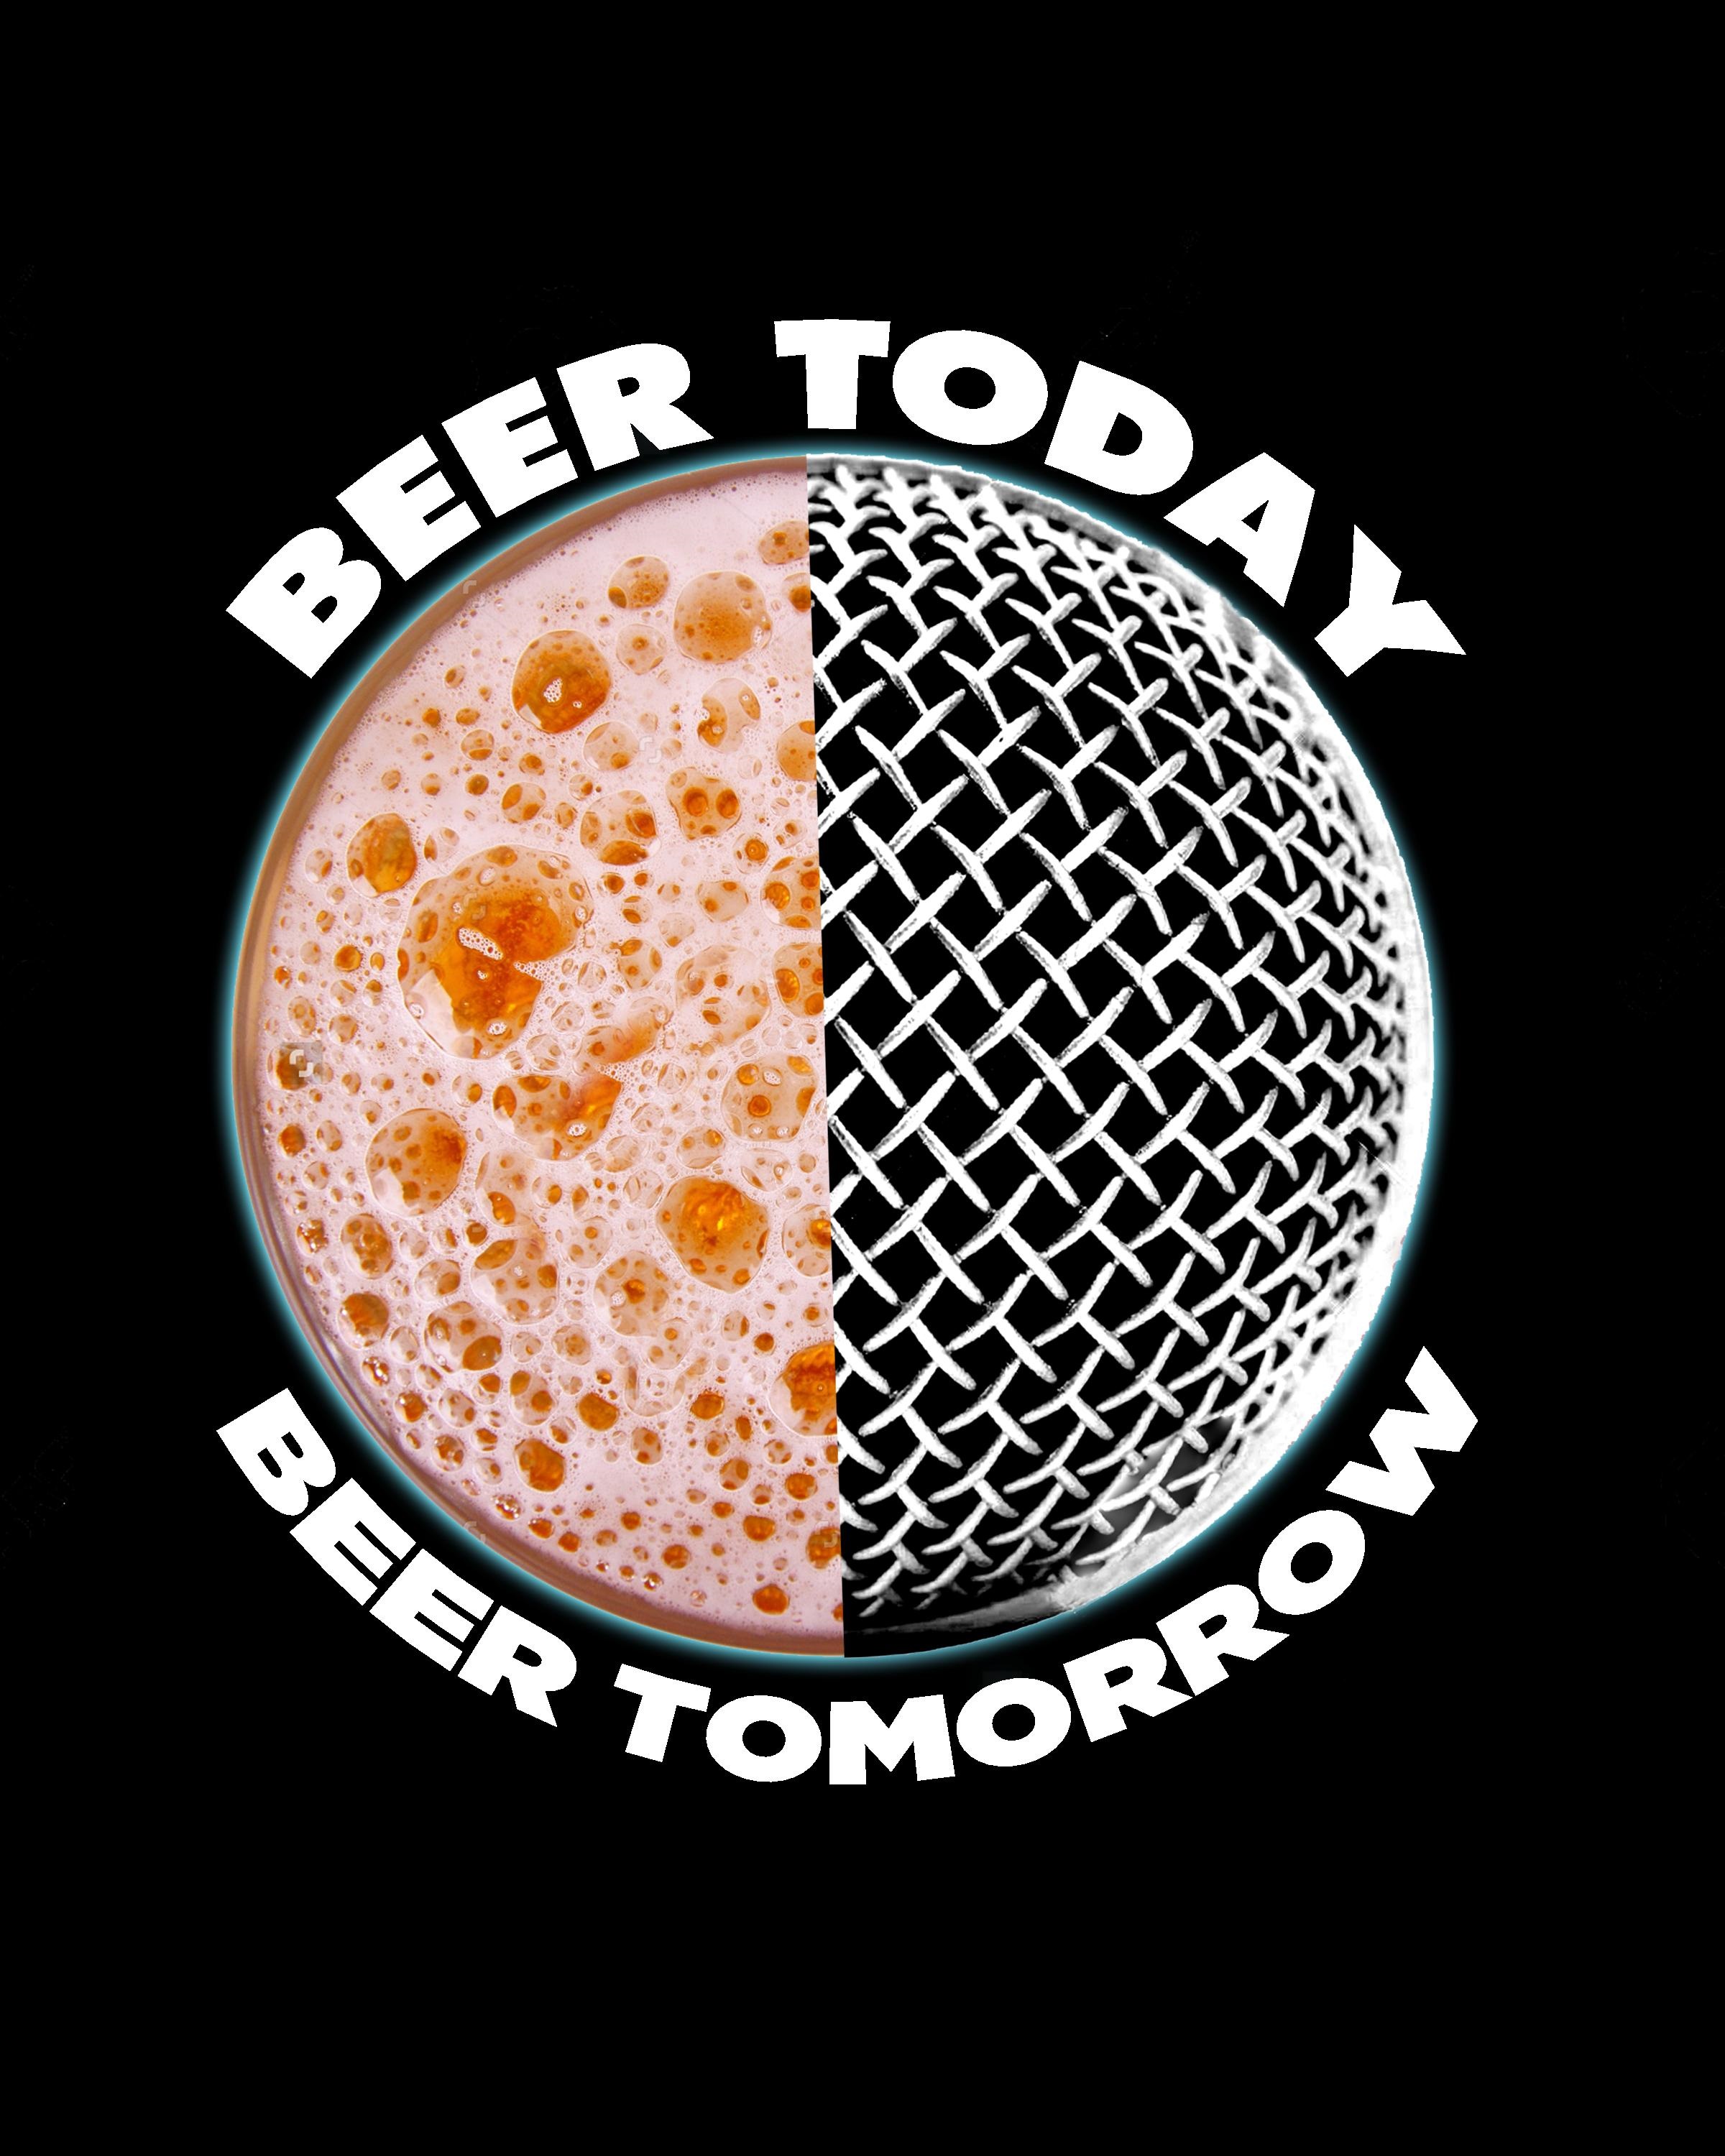 BTBT Episode 35 - 2nd Annual Beer In The Gardens